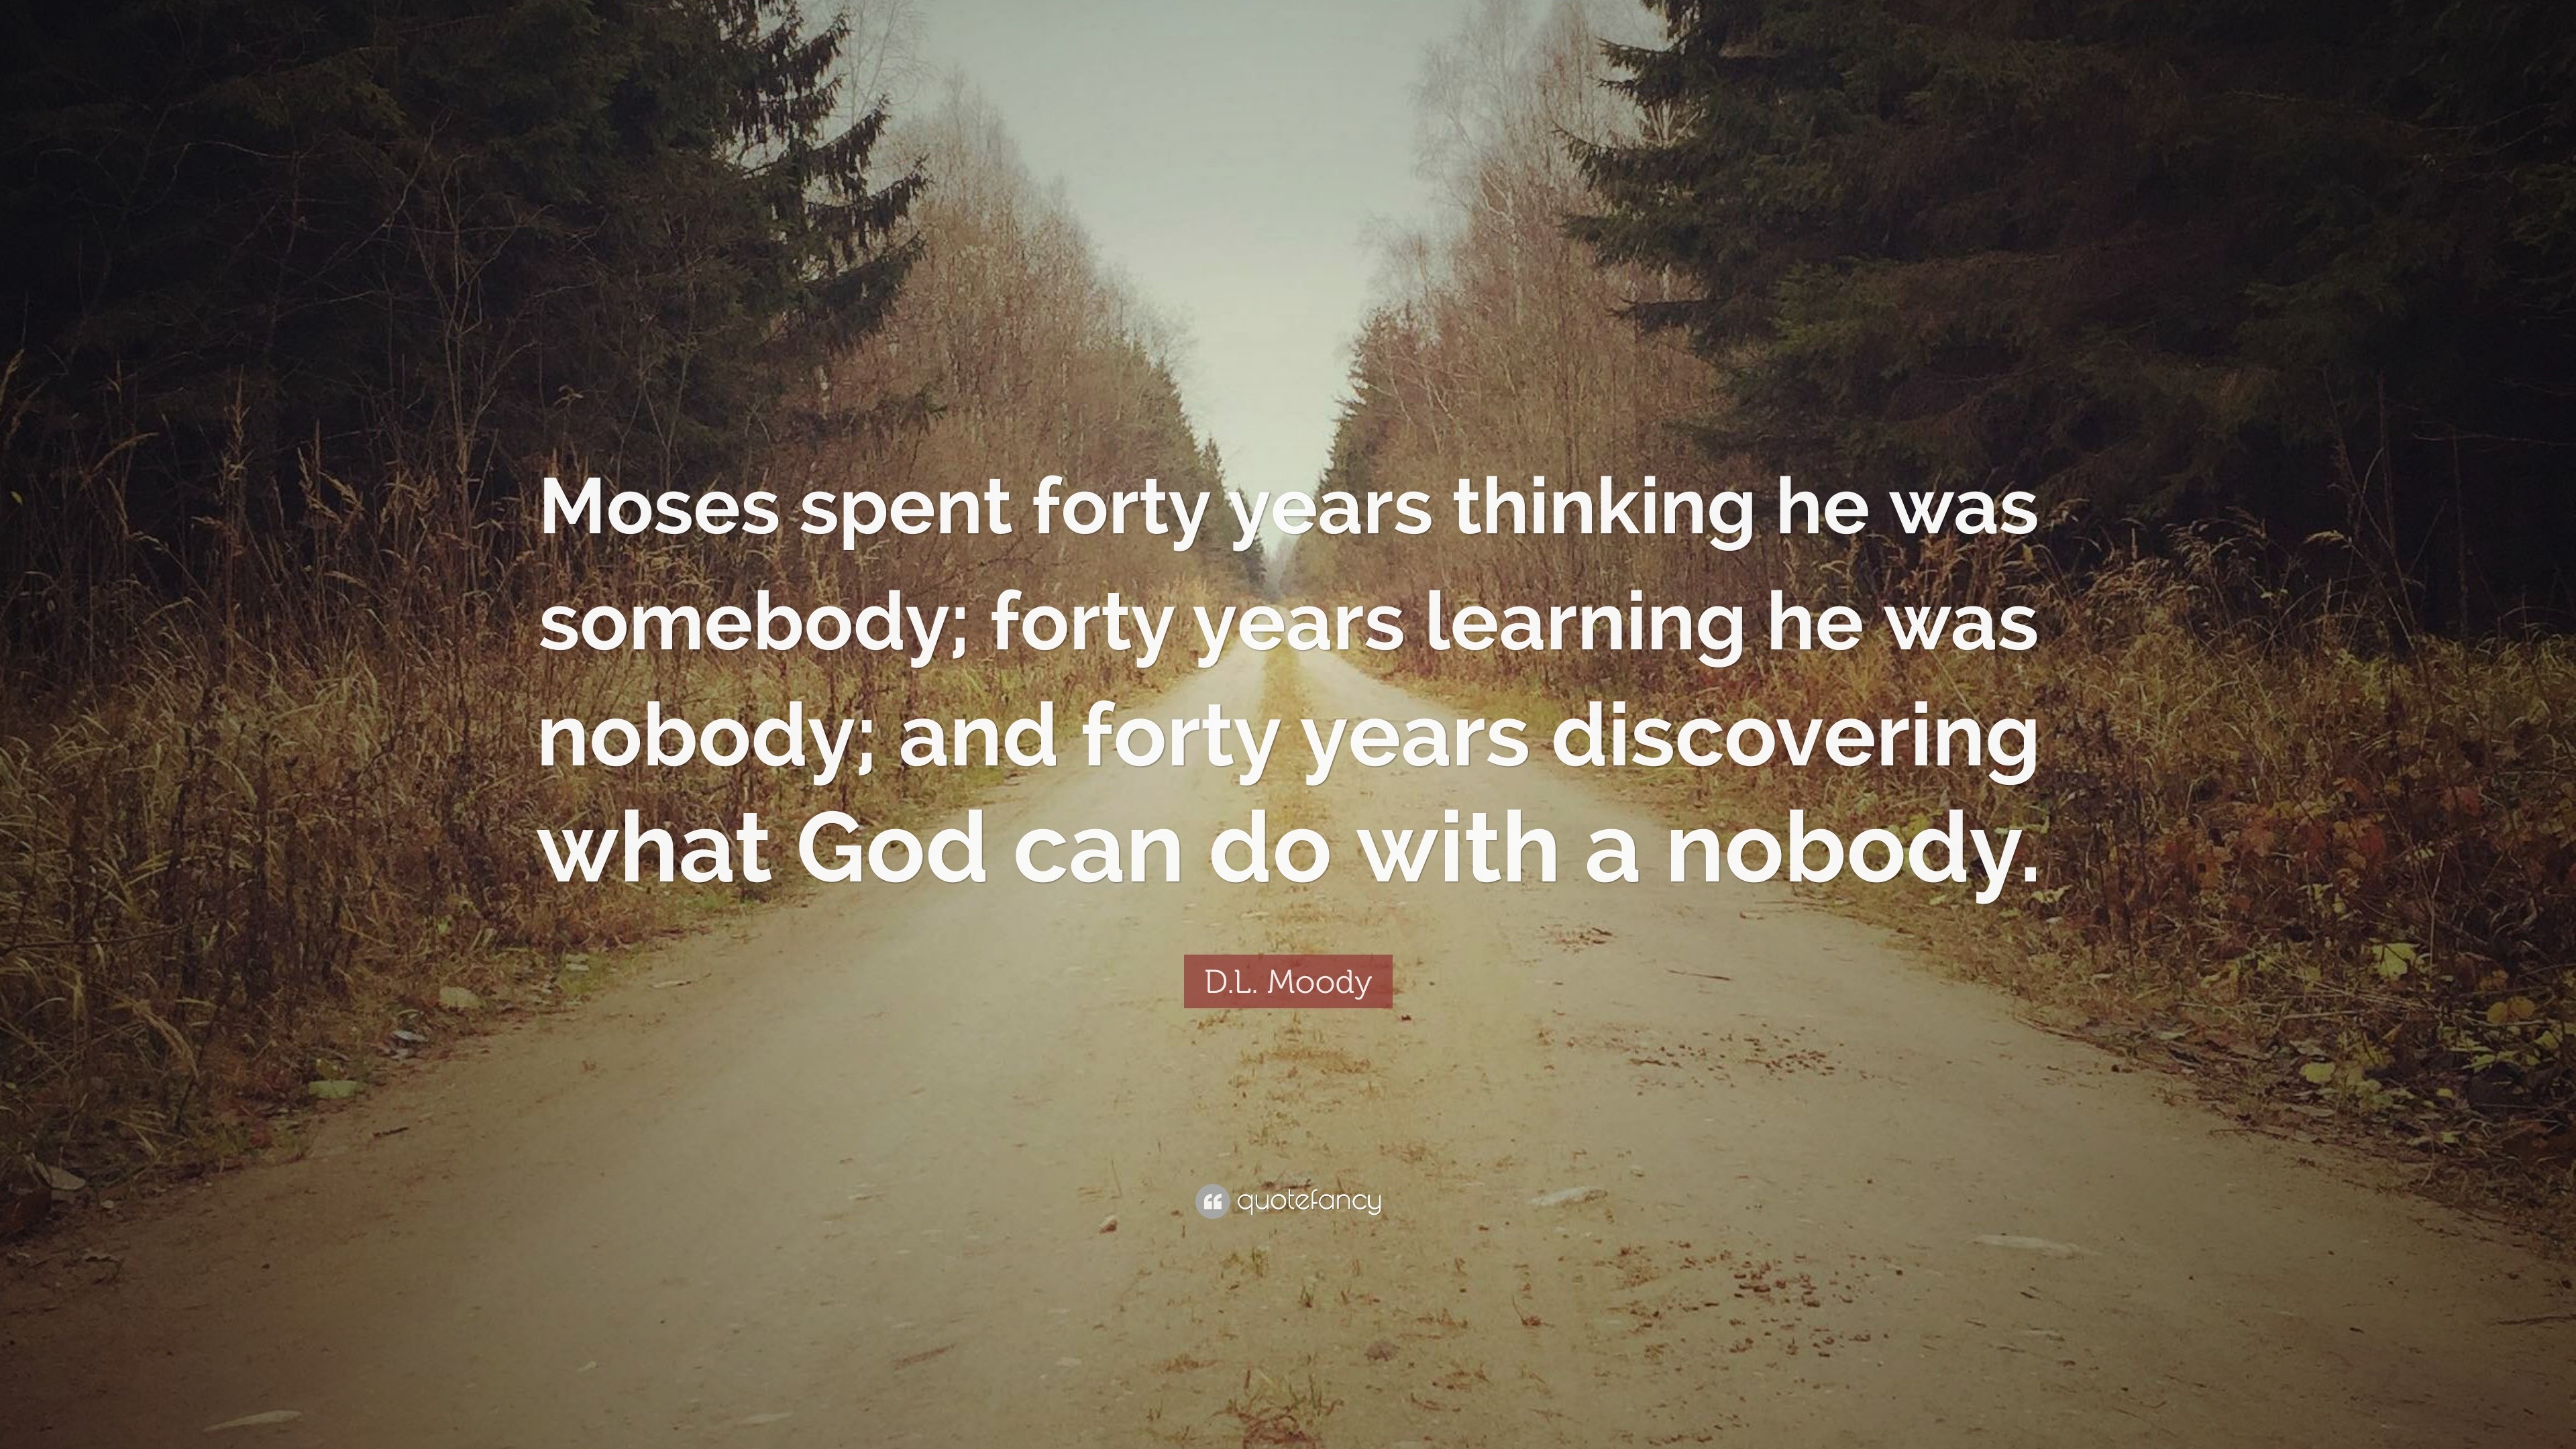 D.L. Moody Quote: “Moses spent forty years thinking he was somebody